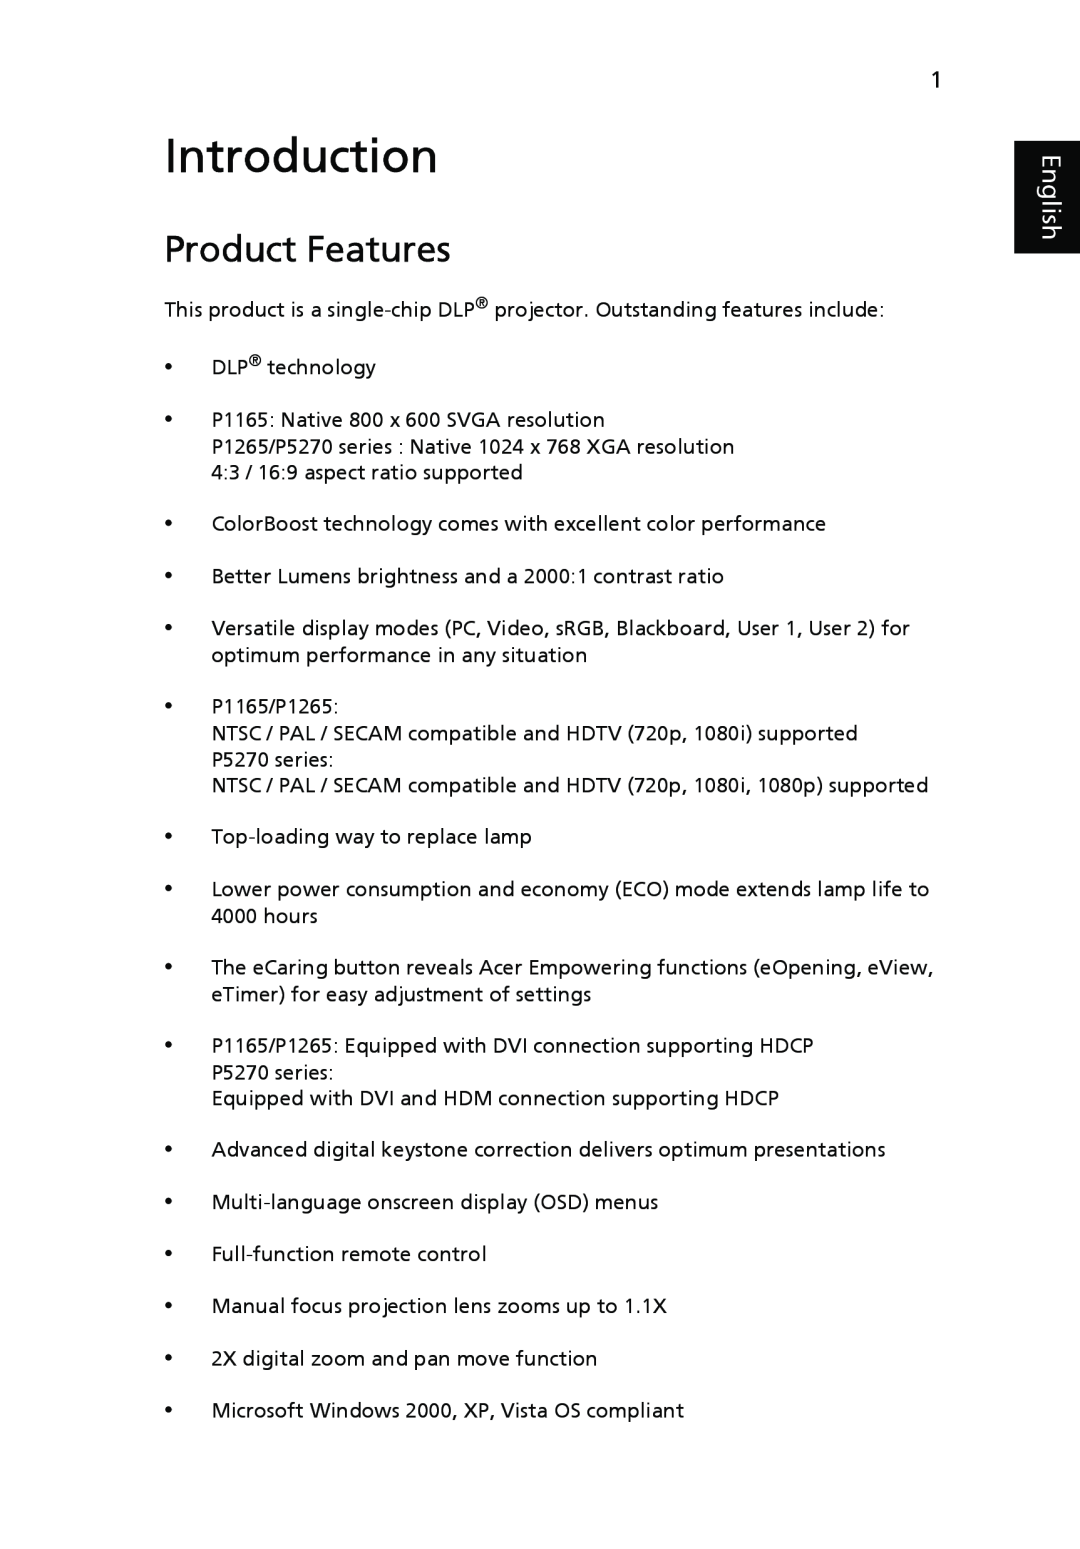 Acer P5270, P1265 manual Introduction, Product Features, English 